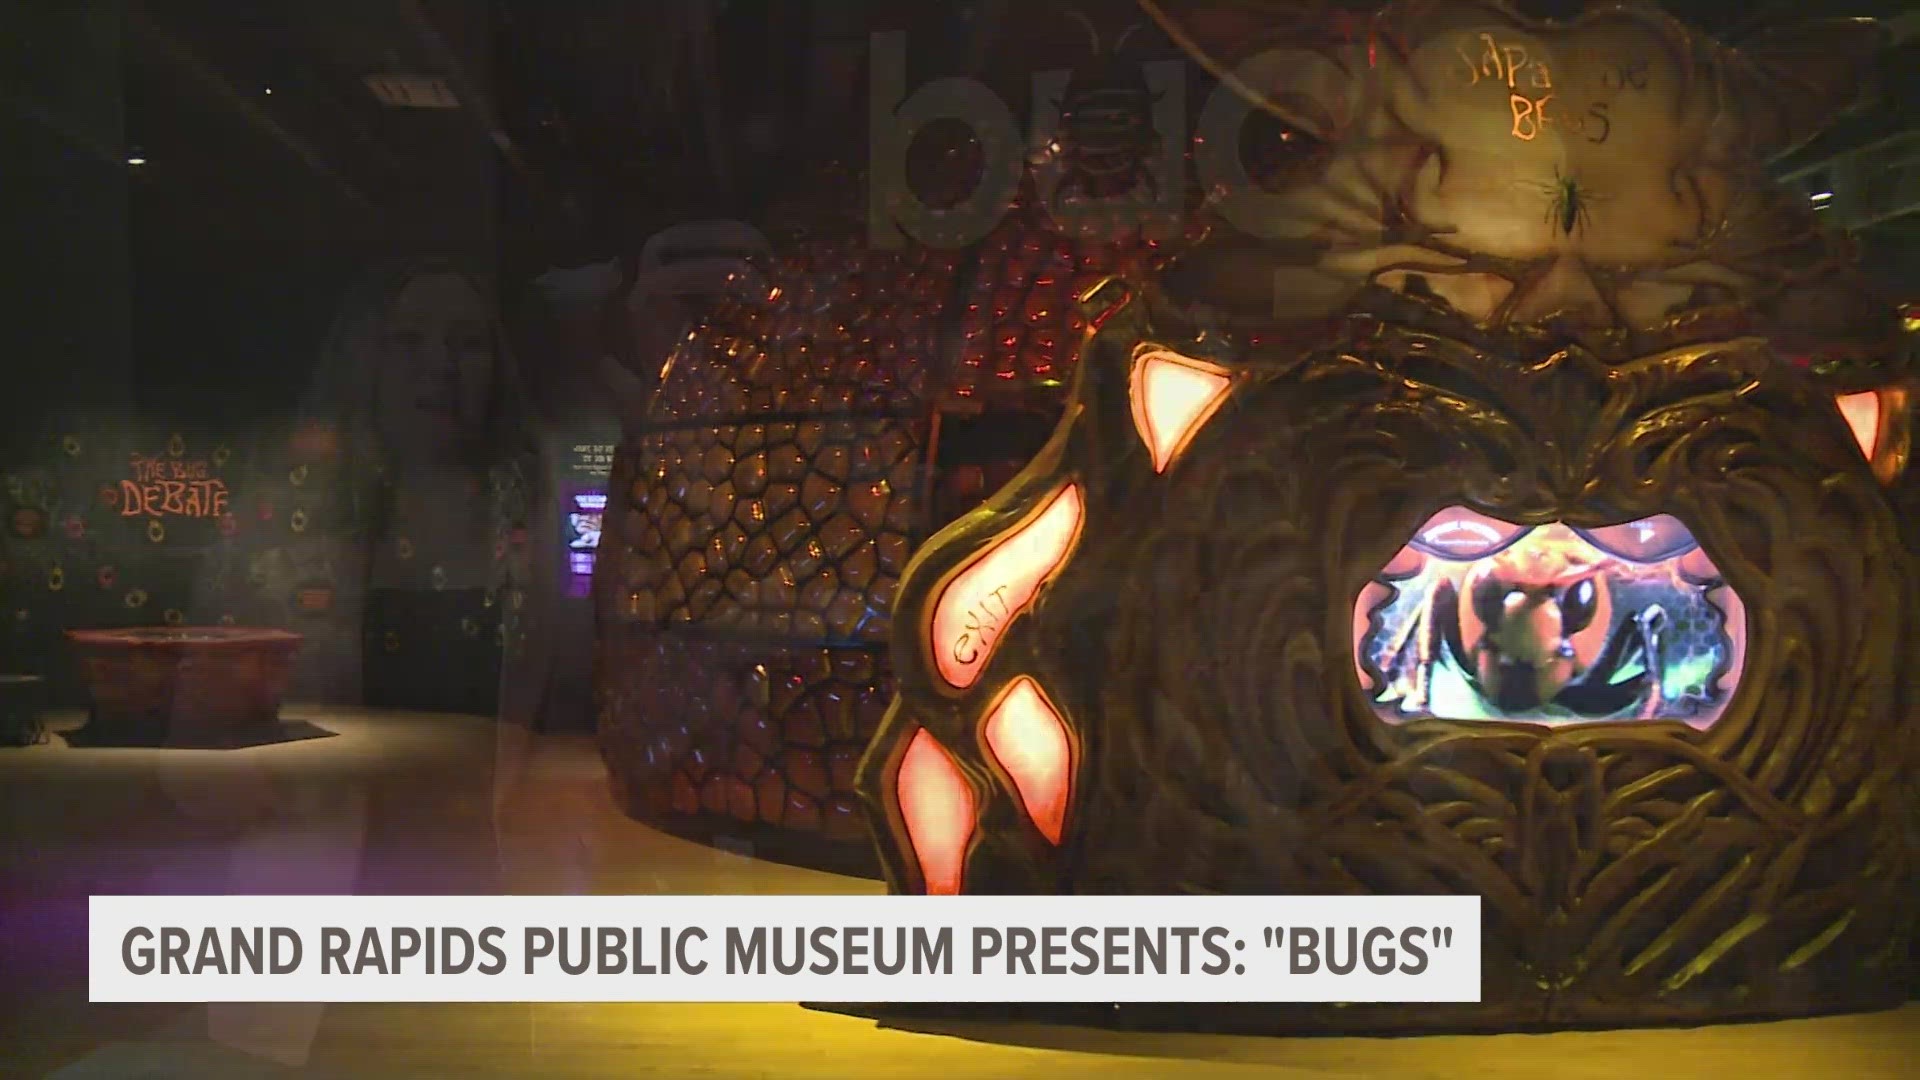 Creepy, crawly and wicked smart: These are all words that describe the bugs that have now invaded the Grand Rapids Public Museum.